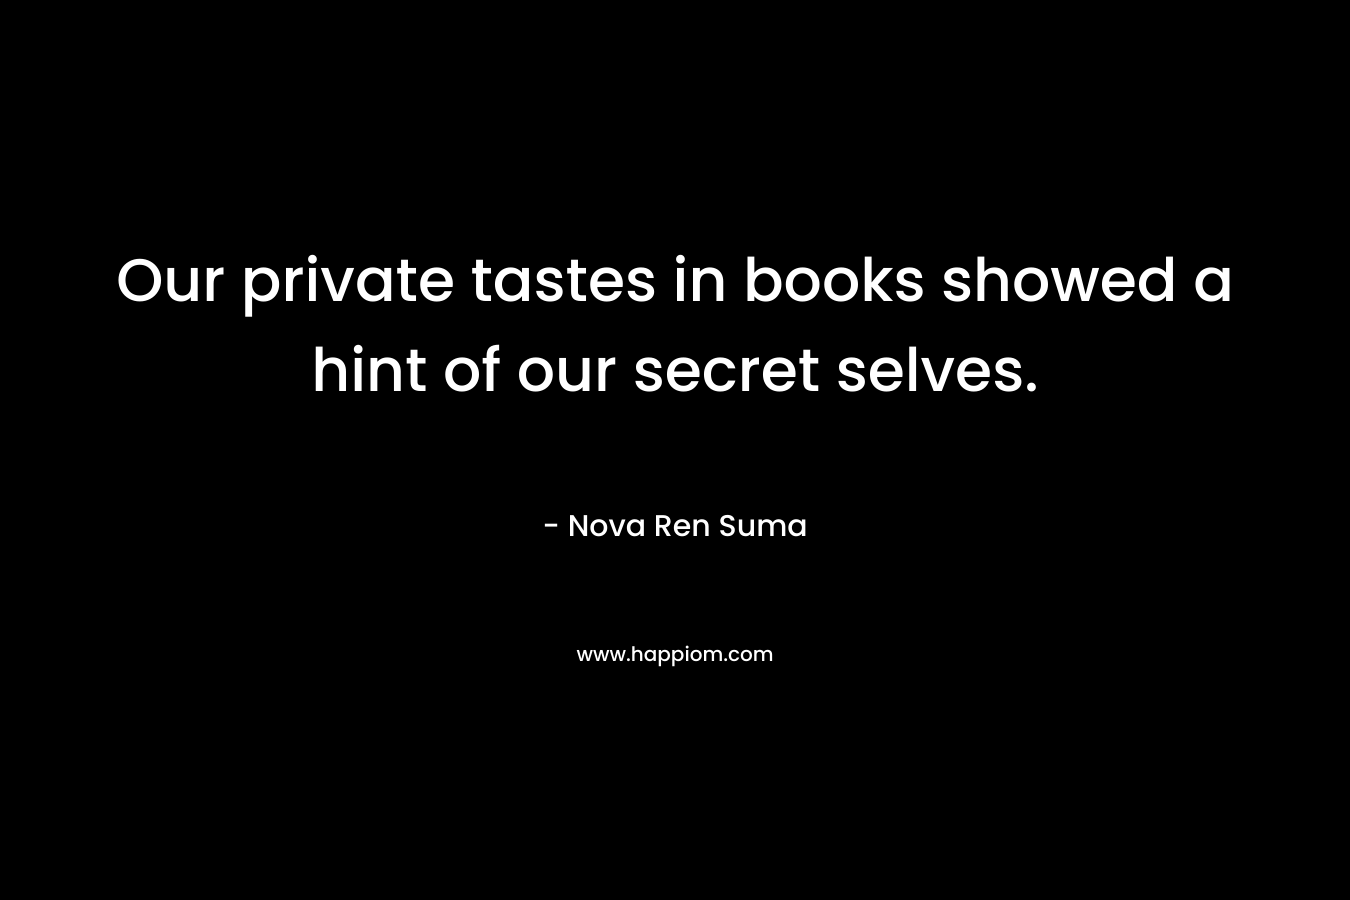 Our private tastes in books showed a hint of our secret selves.